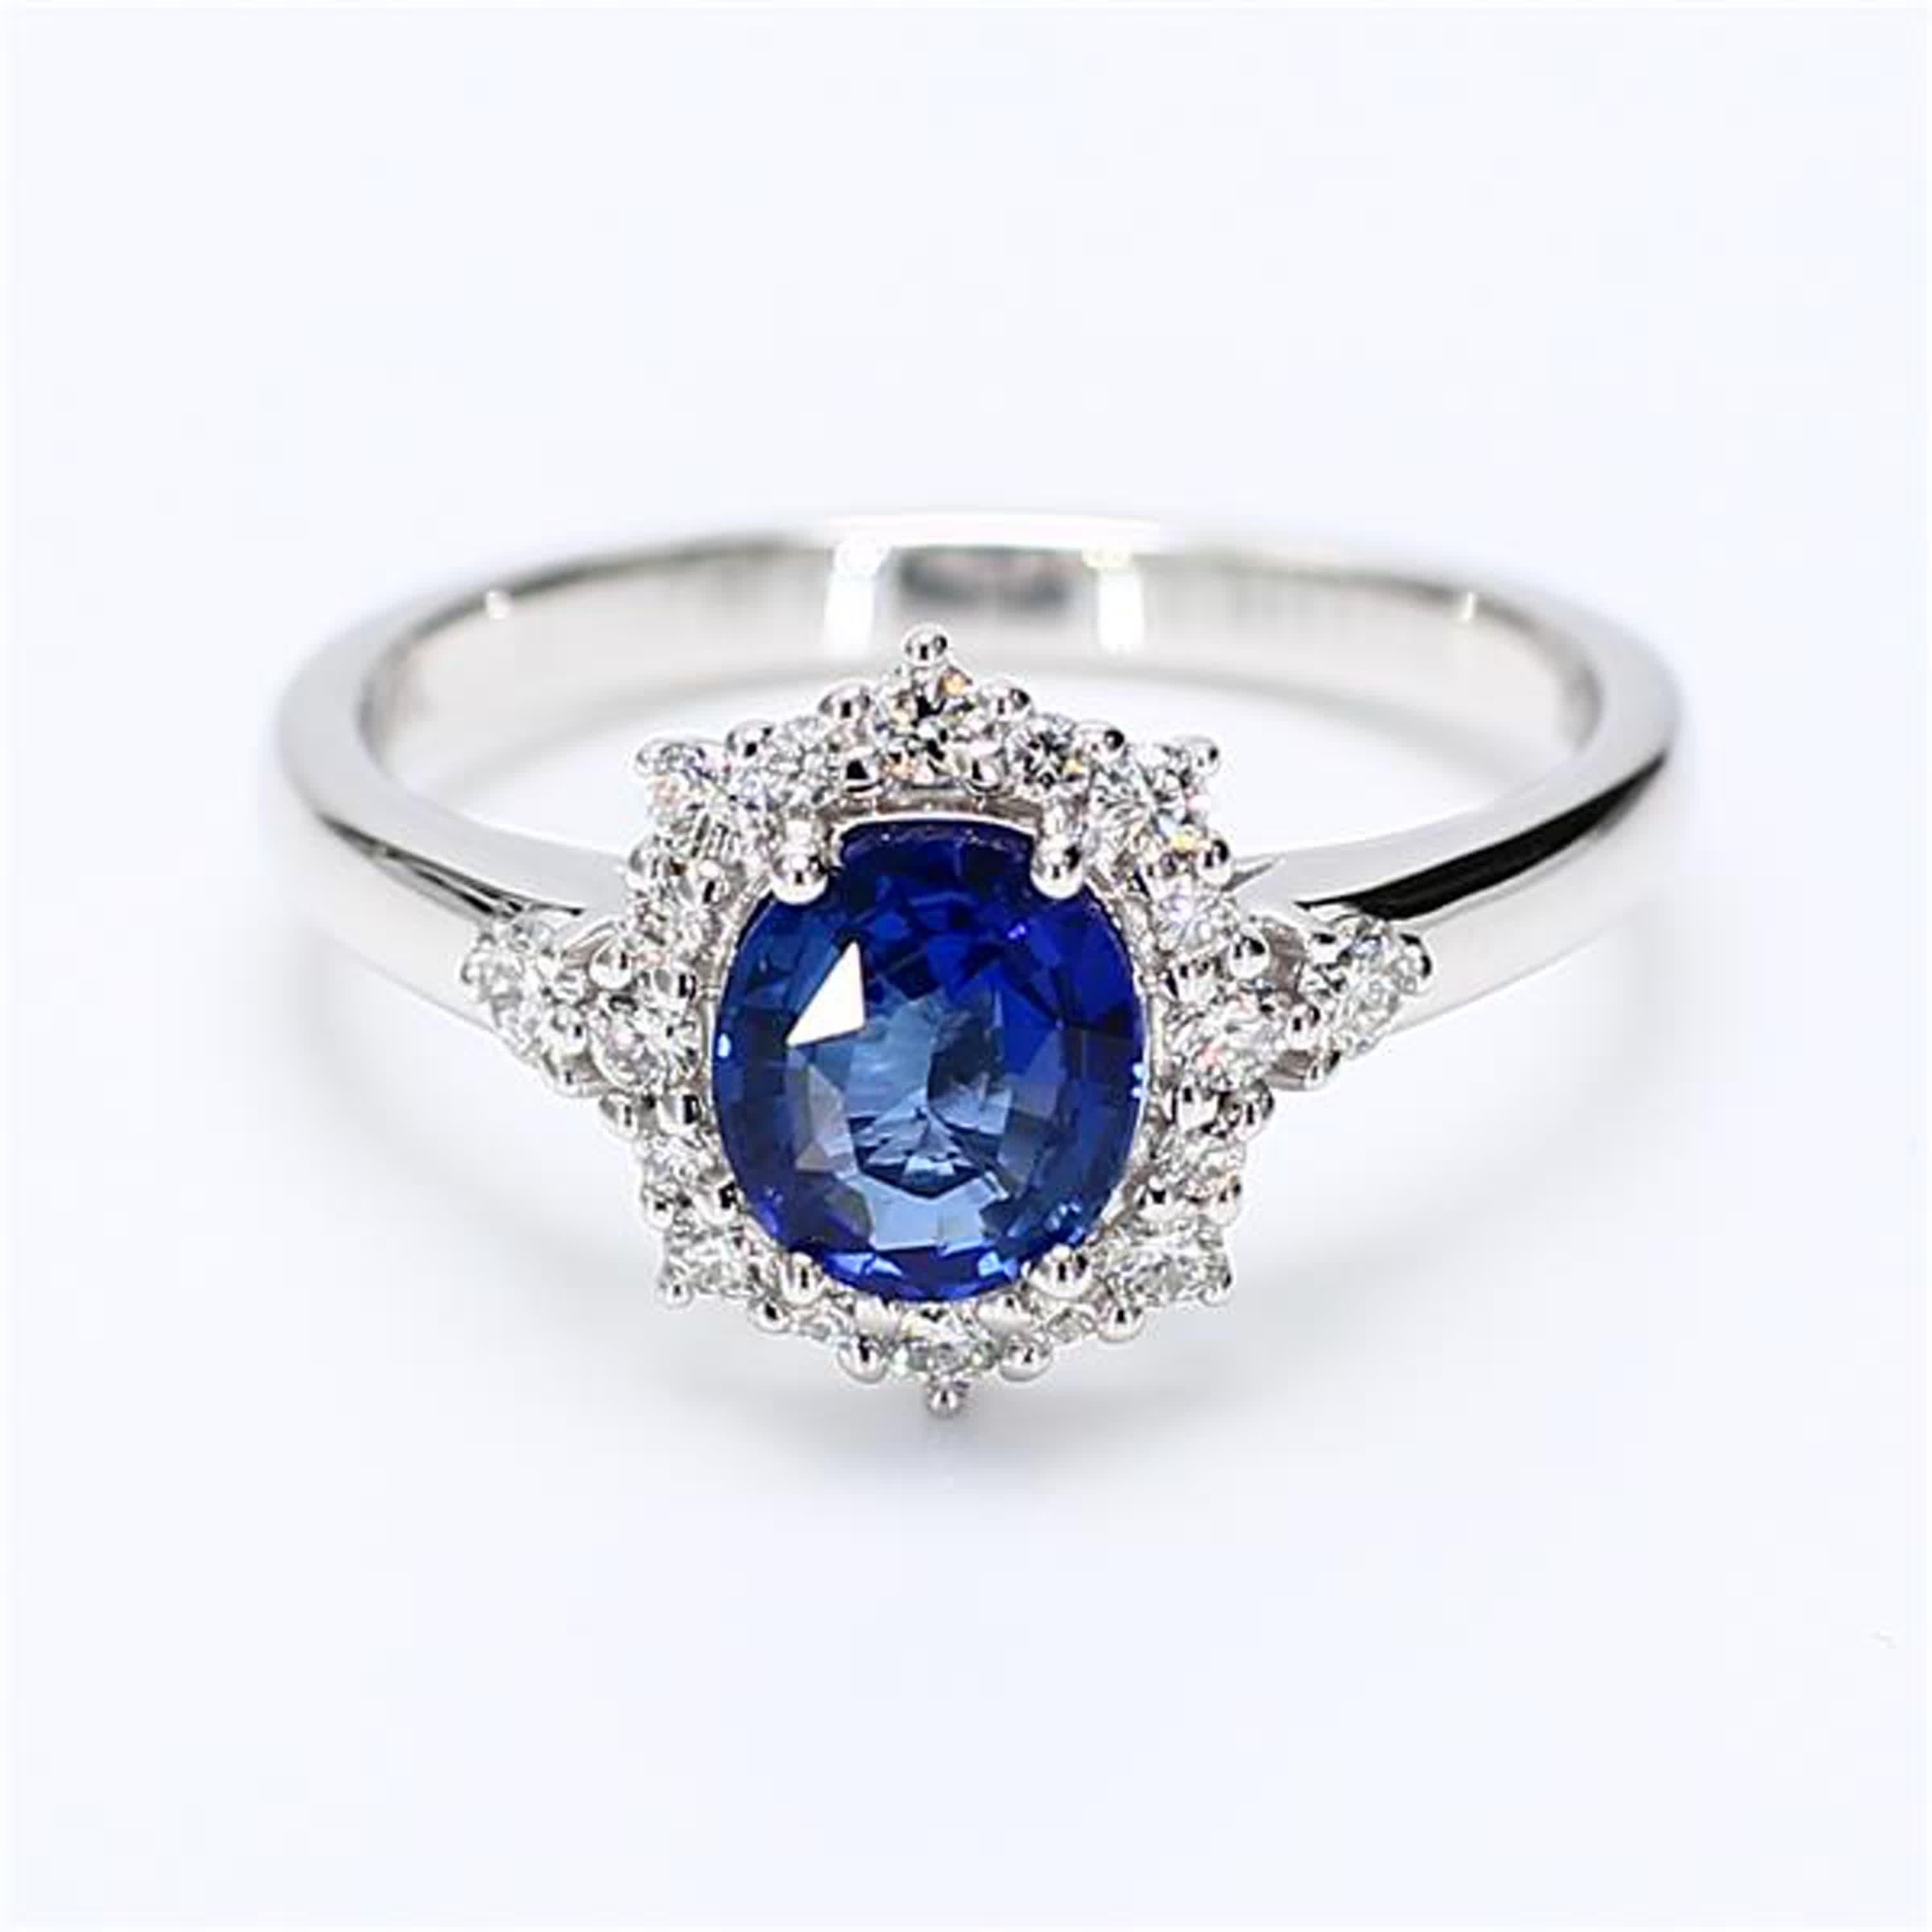 RareGemWorld's classic sapphire ring. Mounted in a beautiful 18K White Gold setting with a natural oval cut blue sapphire. The sapphire is surrounded by natural round white diamond melee. This ring is guaranteed to impress and enhance your personal